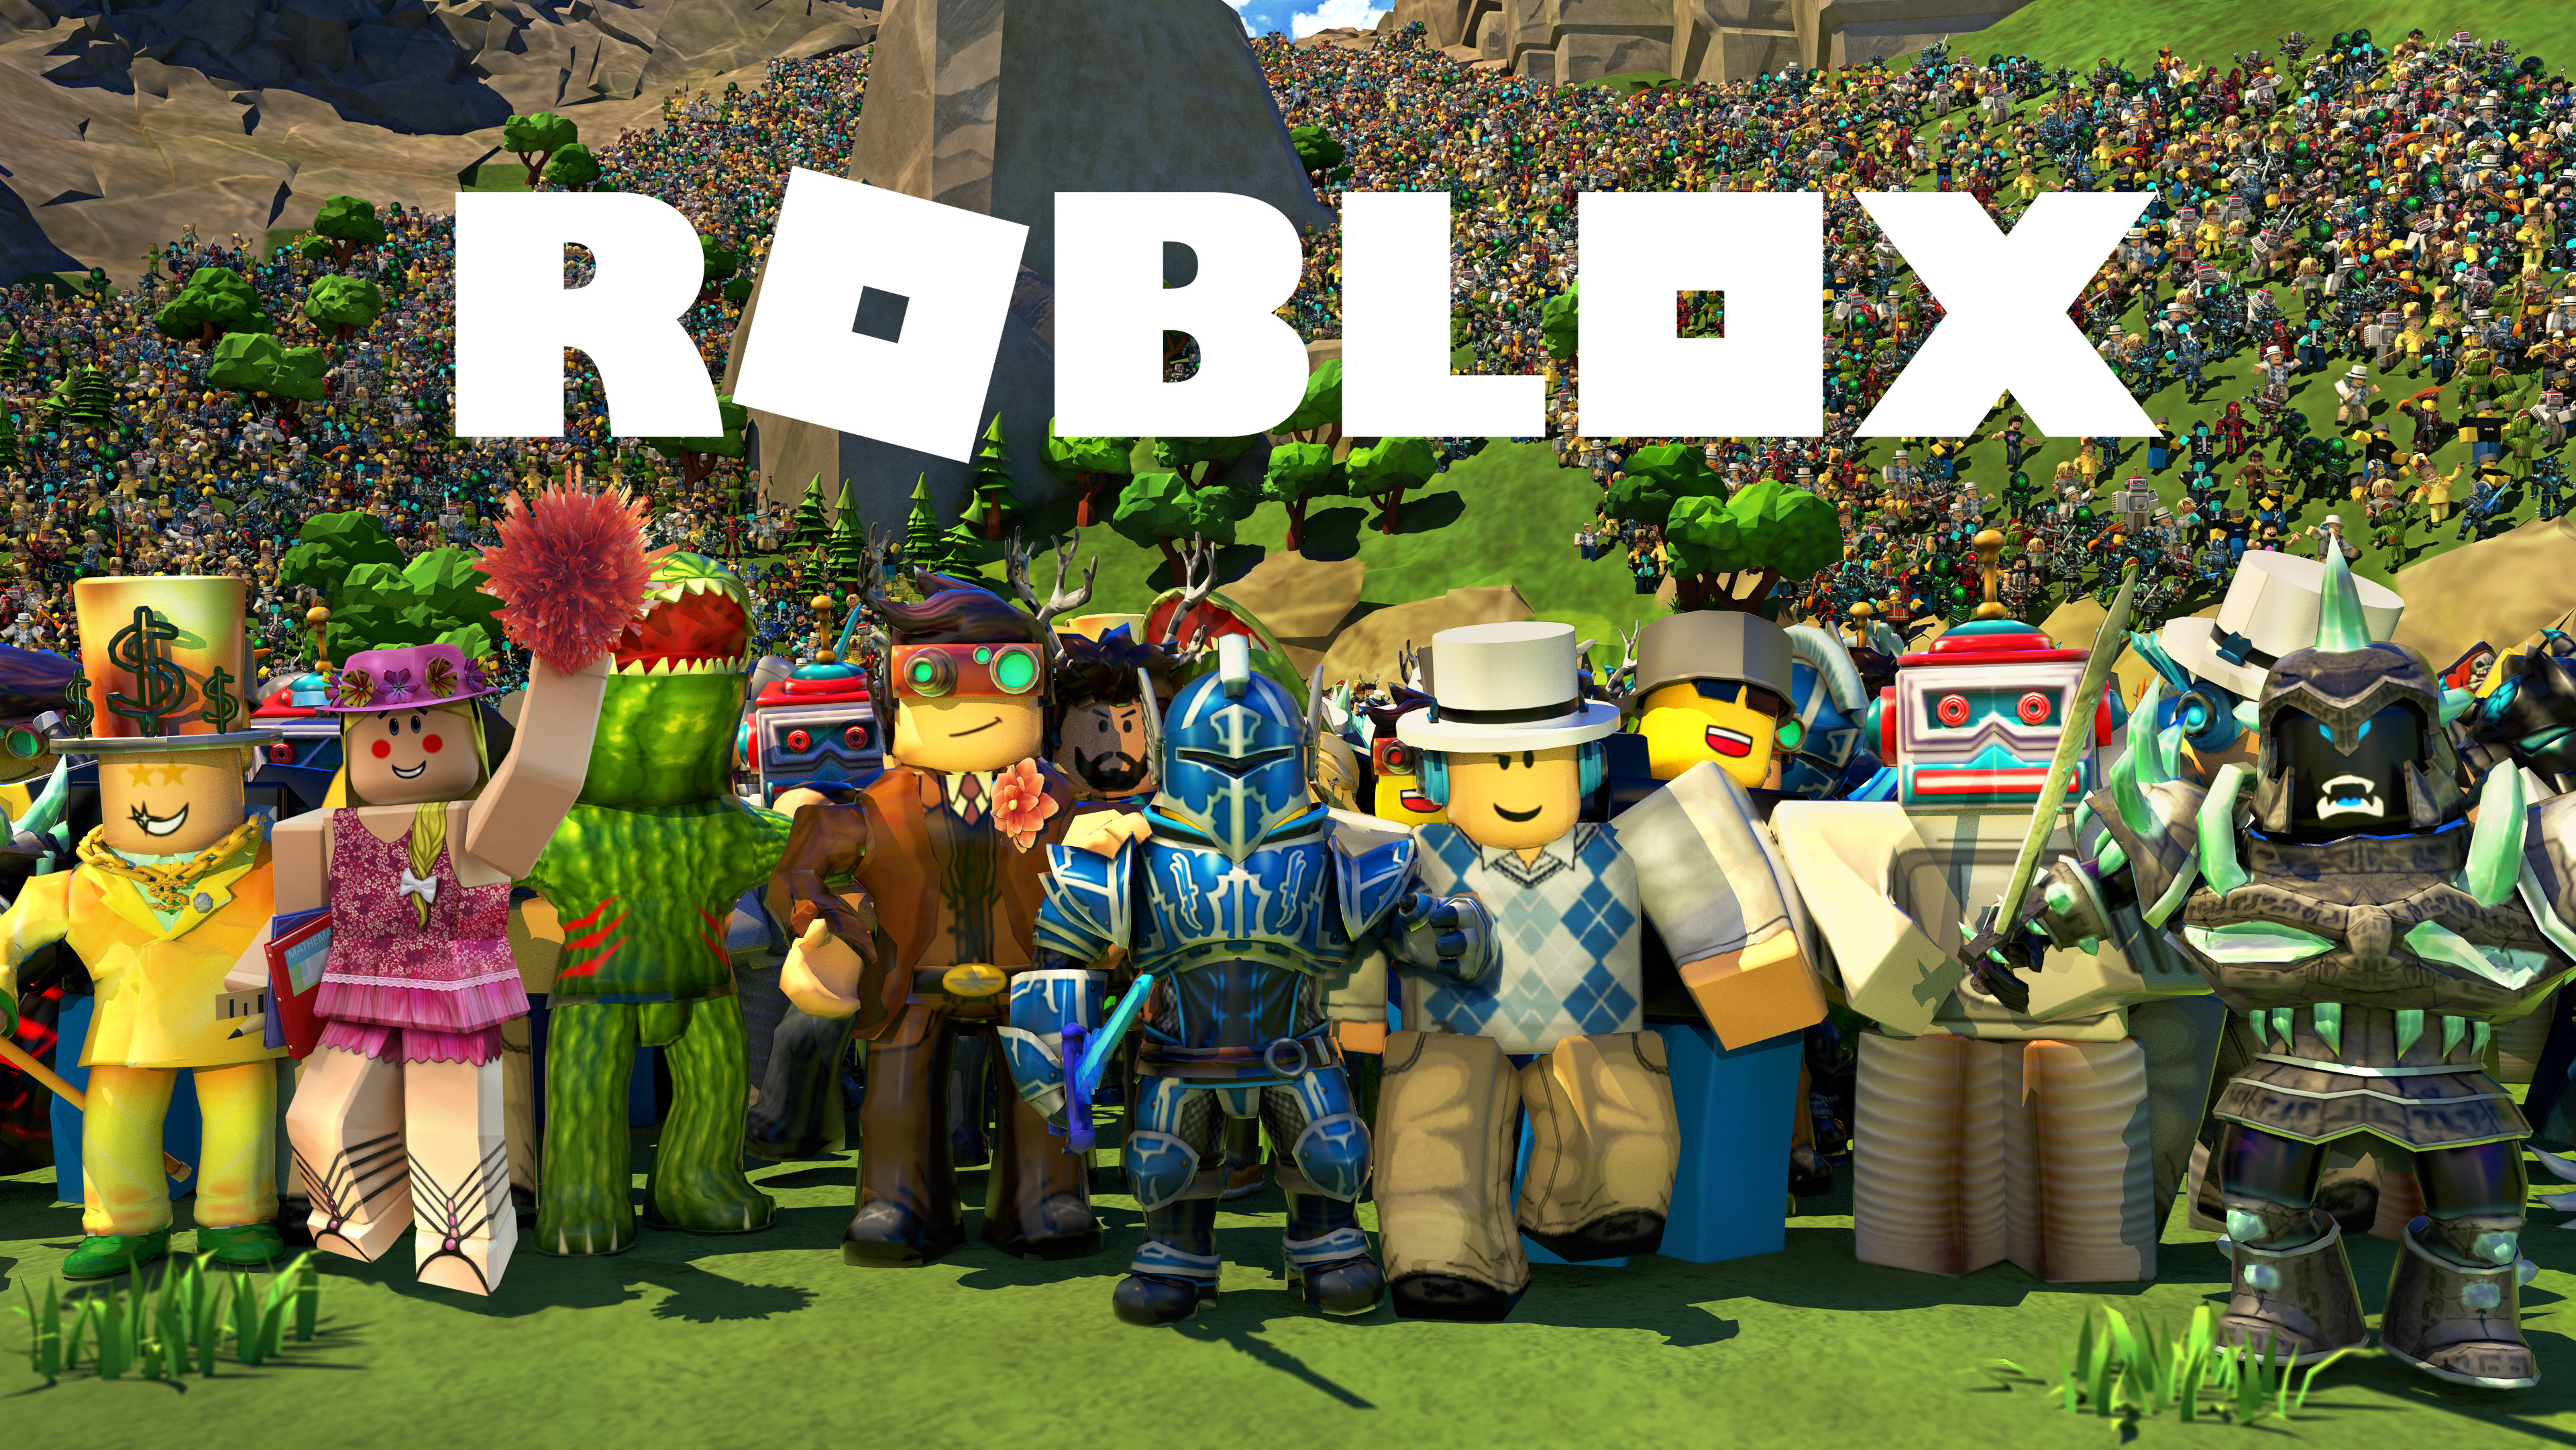 🔥Roblox - Android, iPhone, Desktop HD Backgrounds / Wallpapers (1080p, 4k)  - #166928